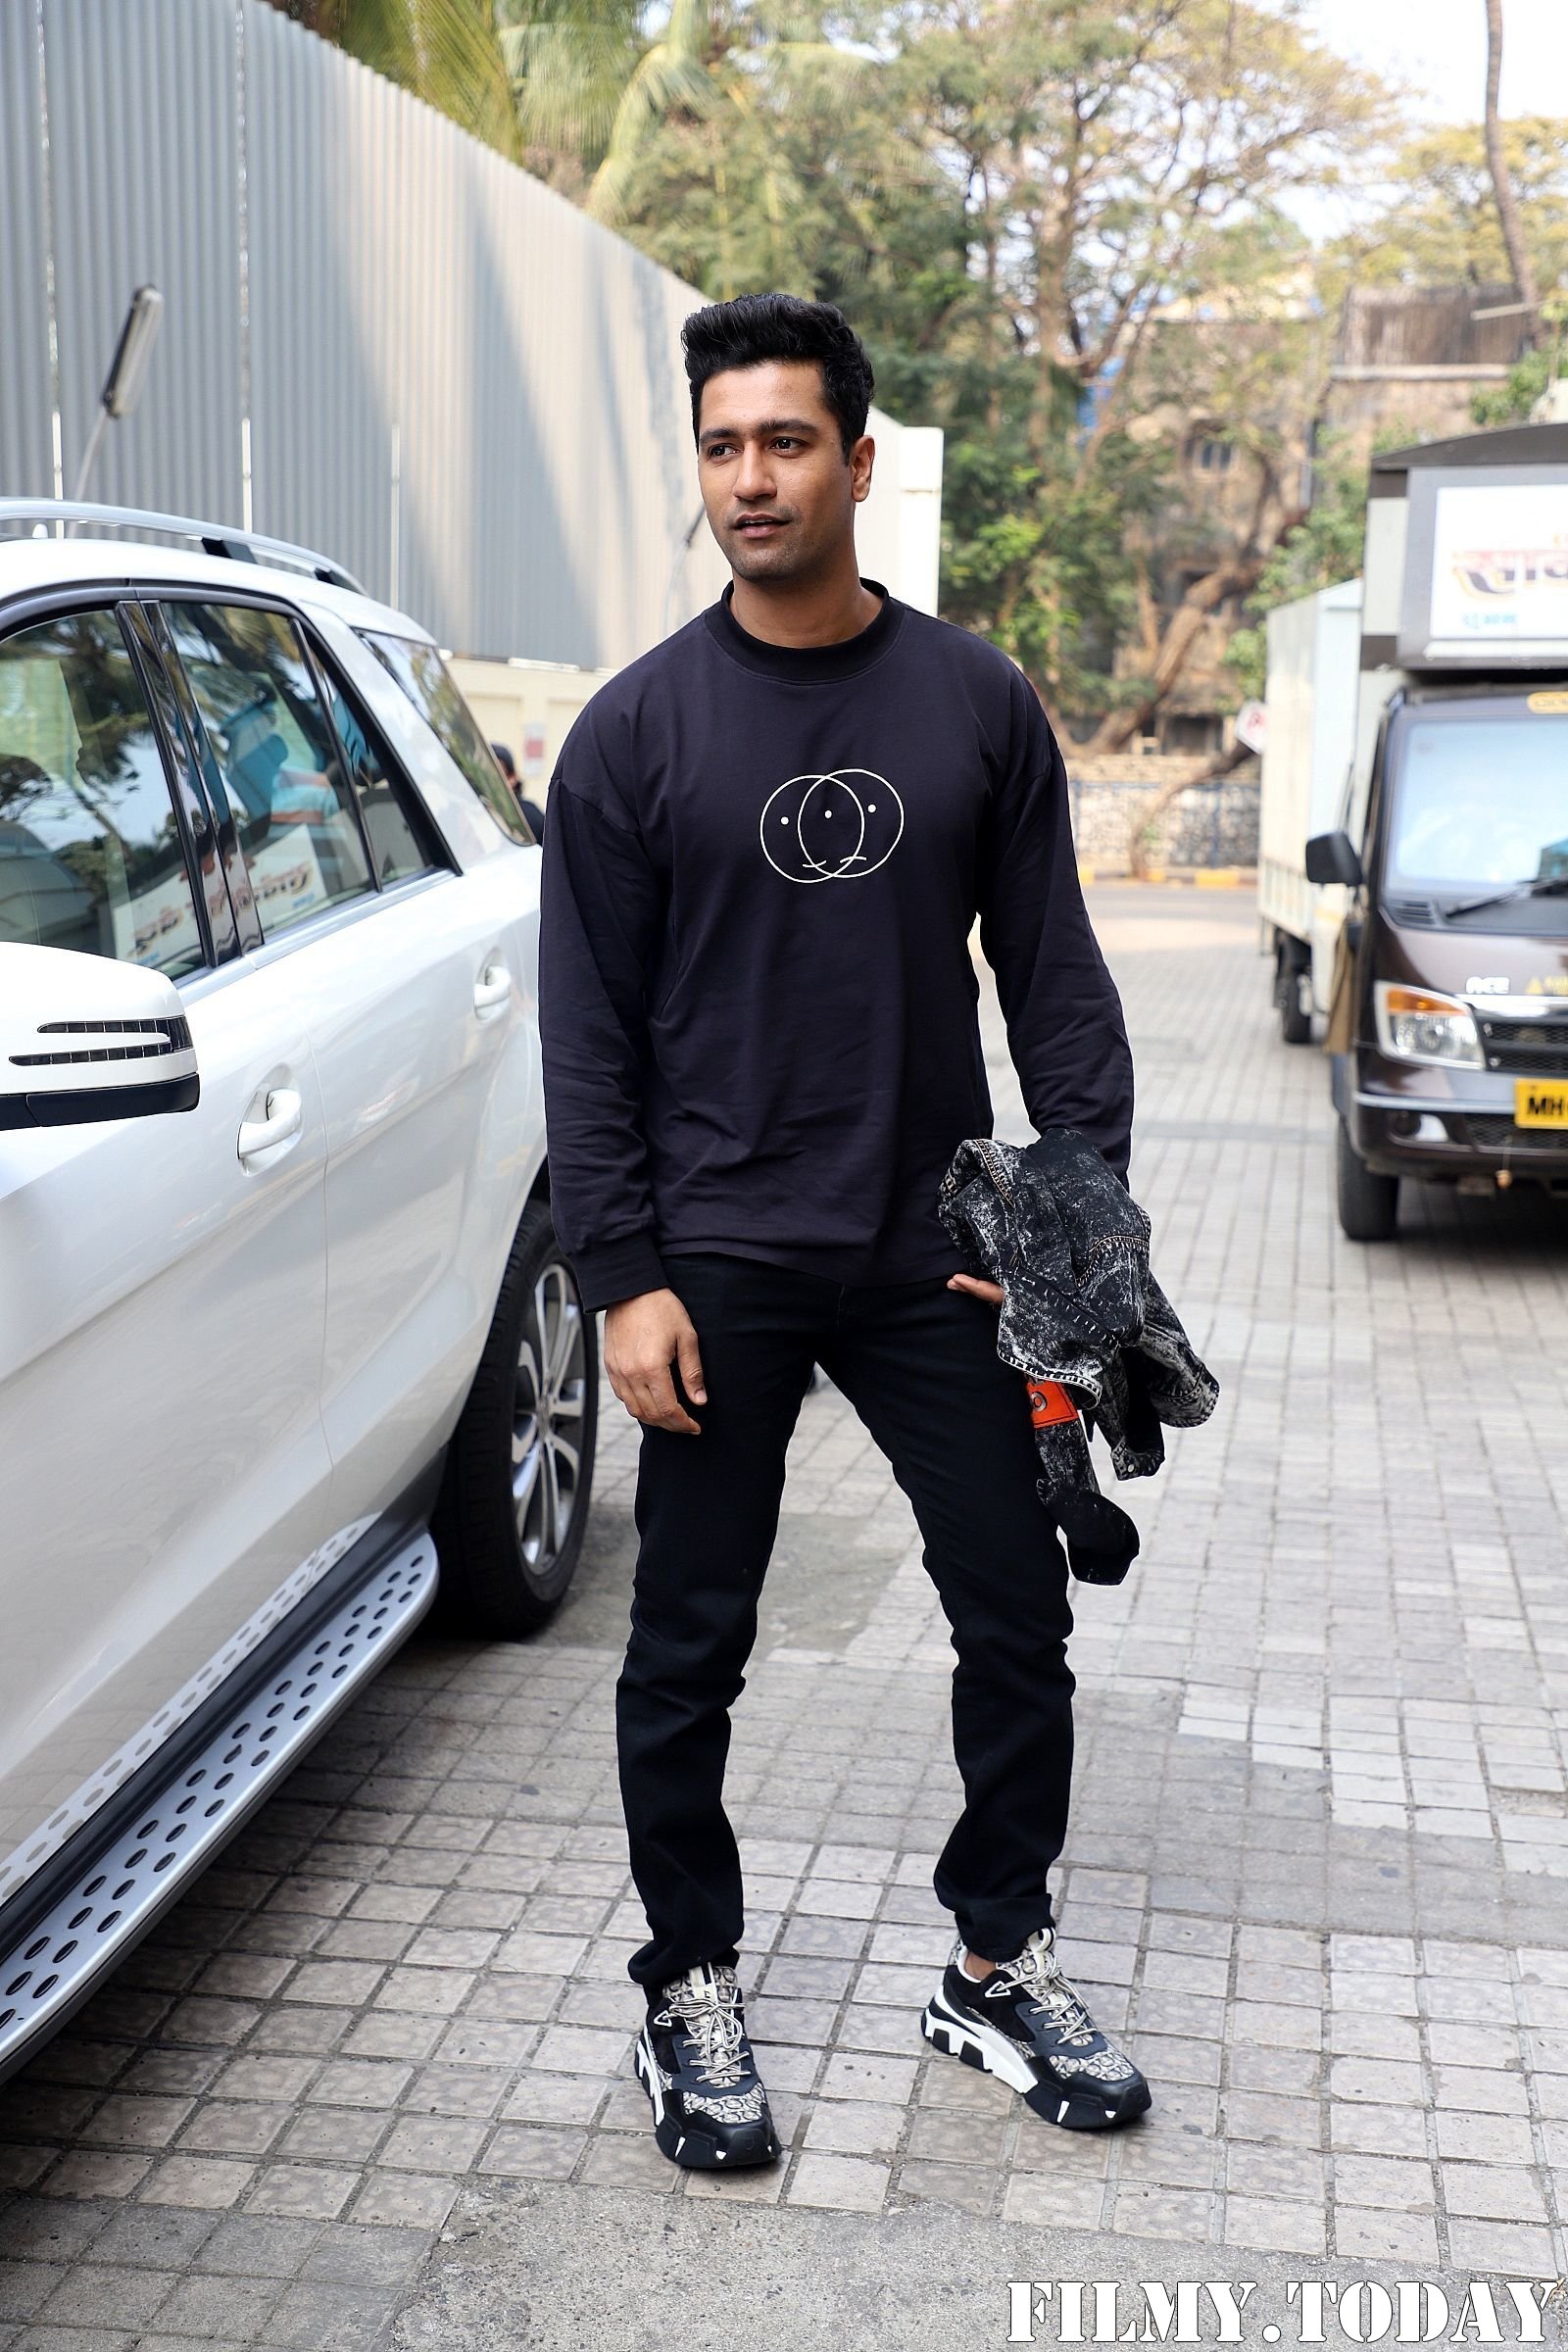 Vicky Kaushal - Photos: Trailer Launch Of Film Bhoot The Haunted Ship At Pvr Juhu | Picture 1719027